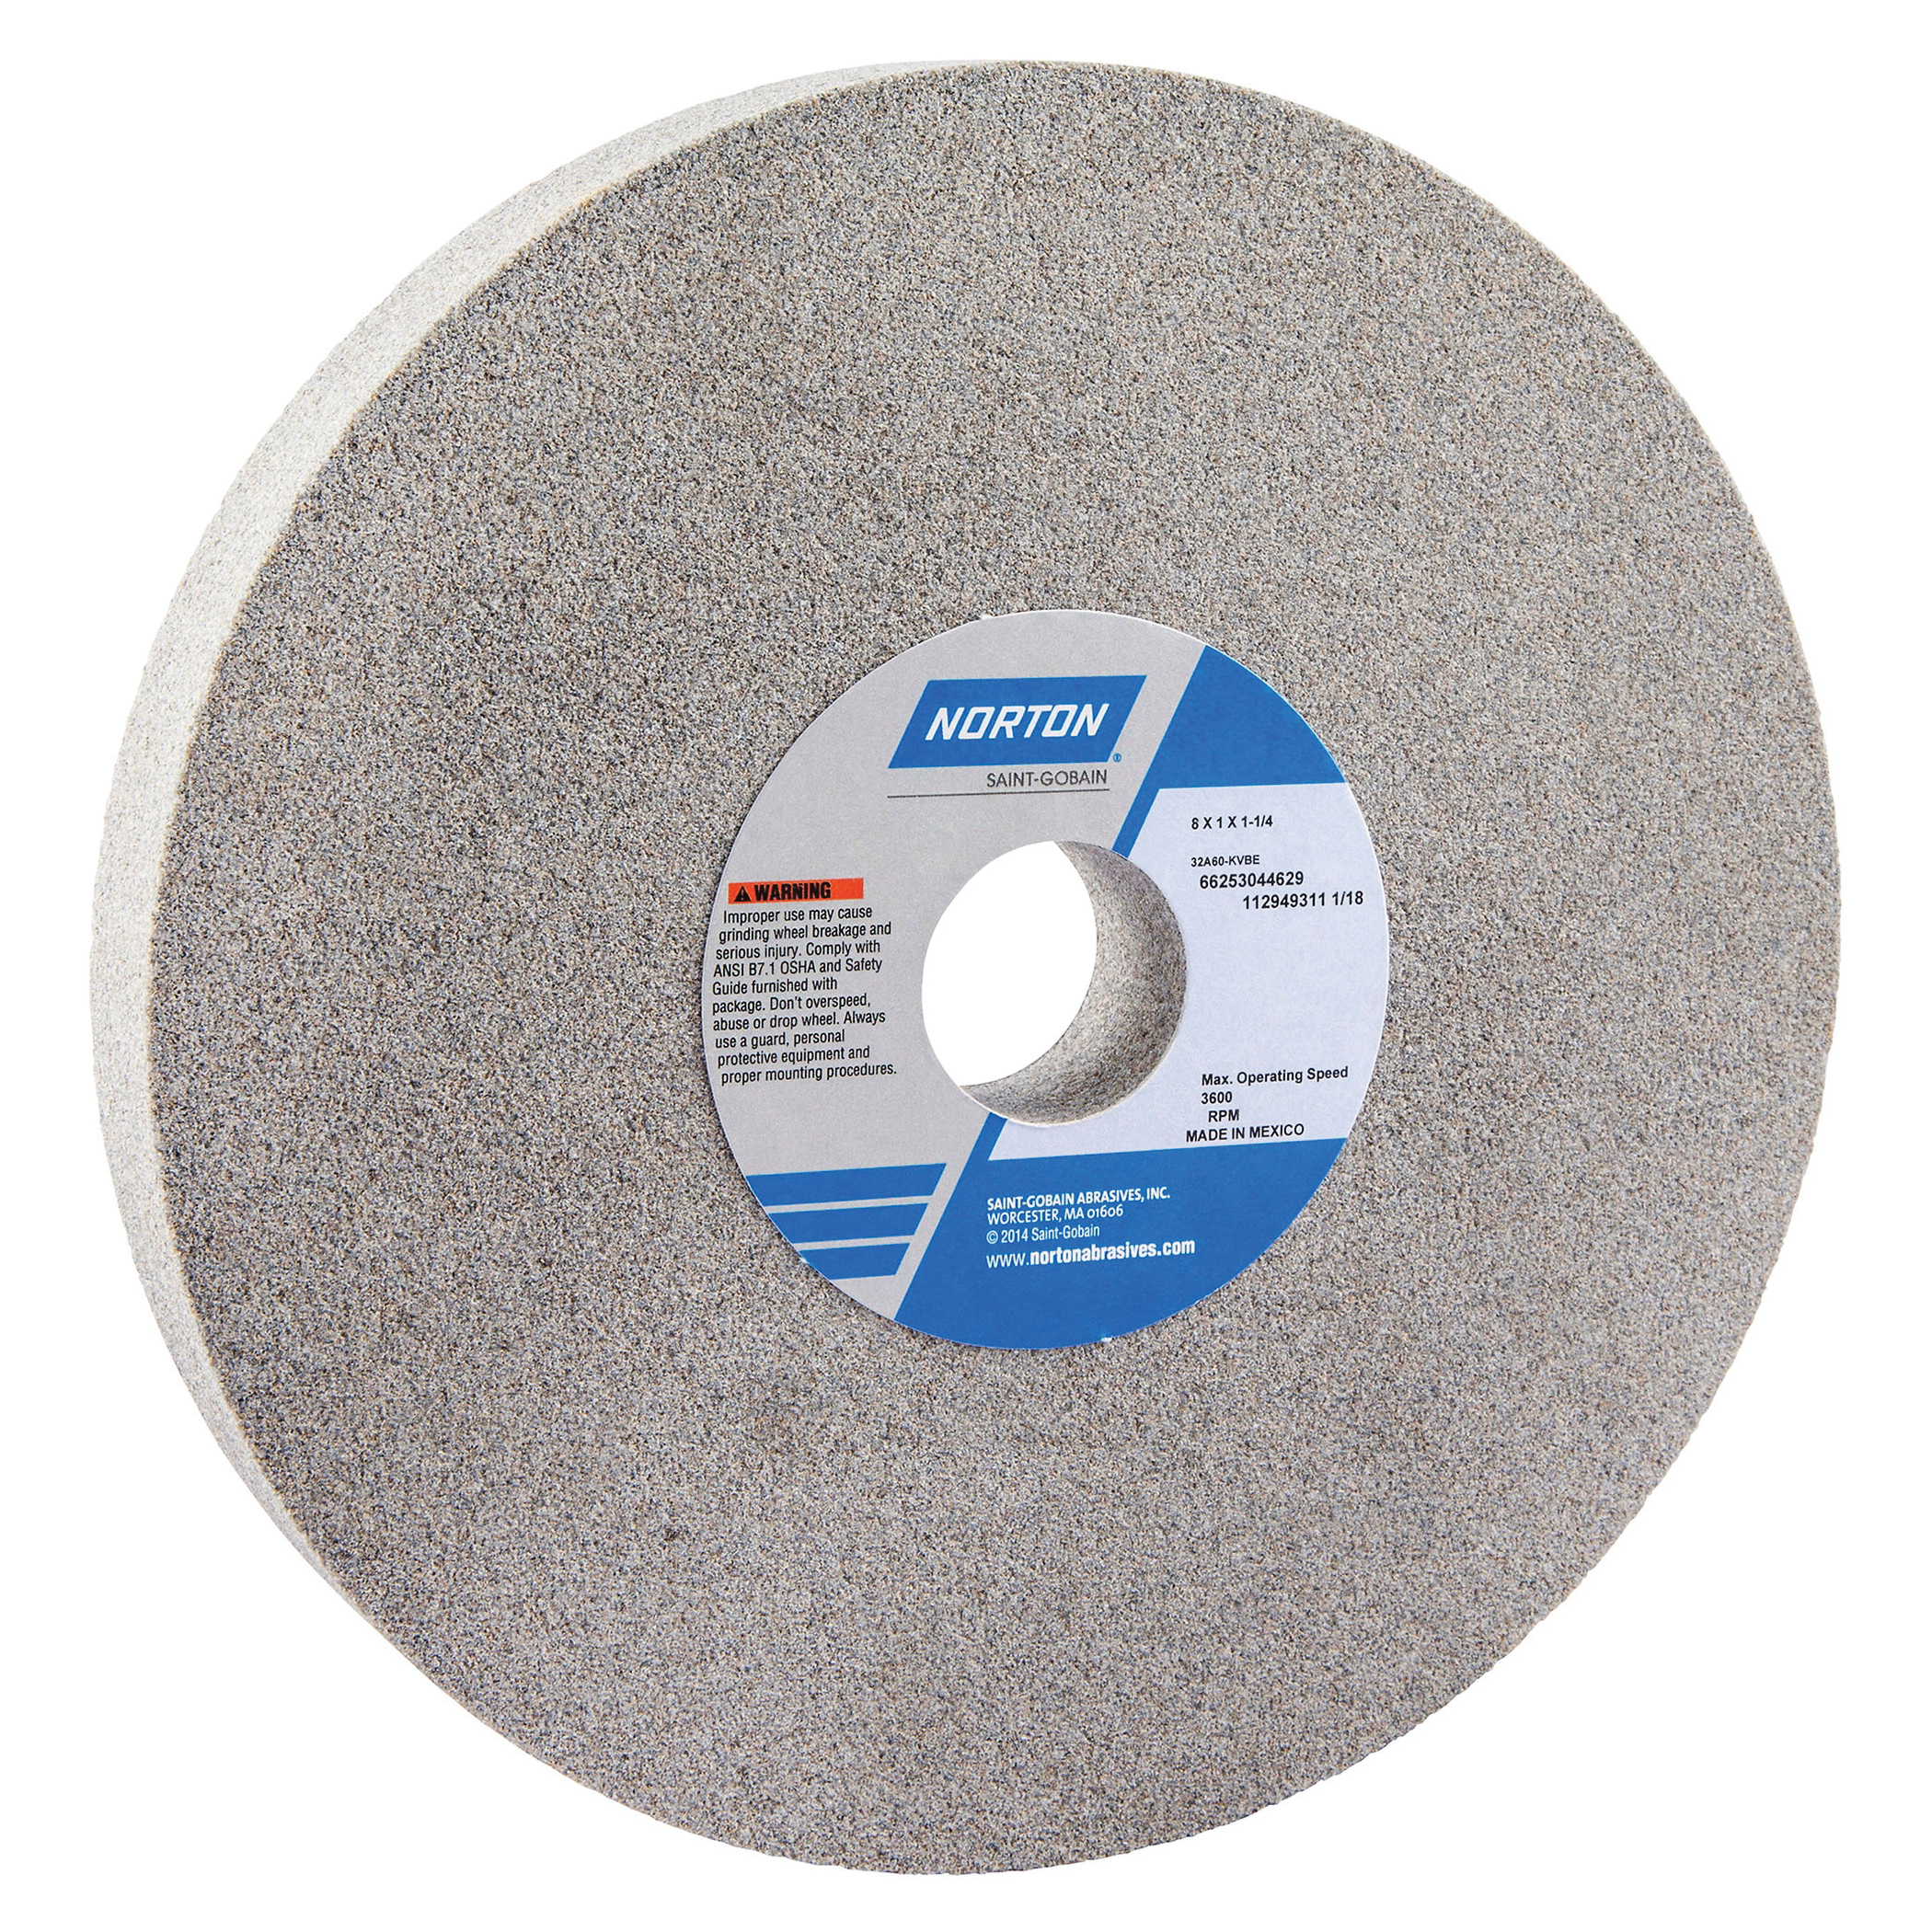 Norton® 66253044629 32A Straight Toolroom Wheel, 8 in Dia x 1 in THK, 1-1/4 in Center Hole, 60 Grit, Aluminum Oxide Abrasive